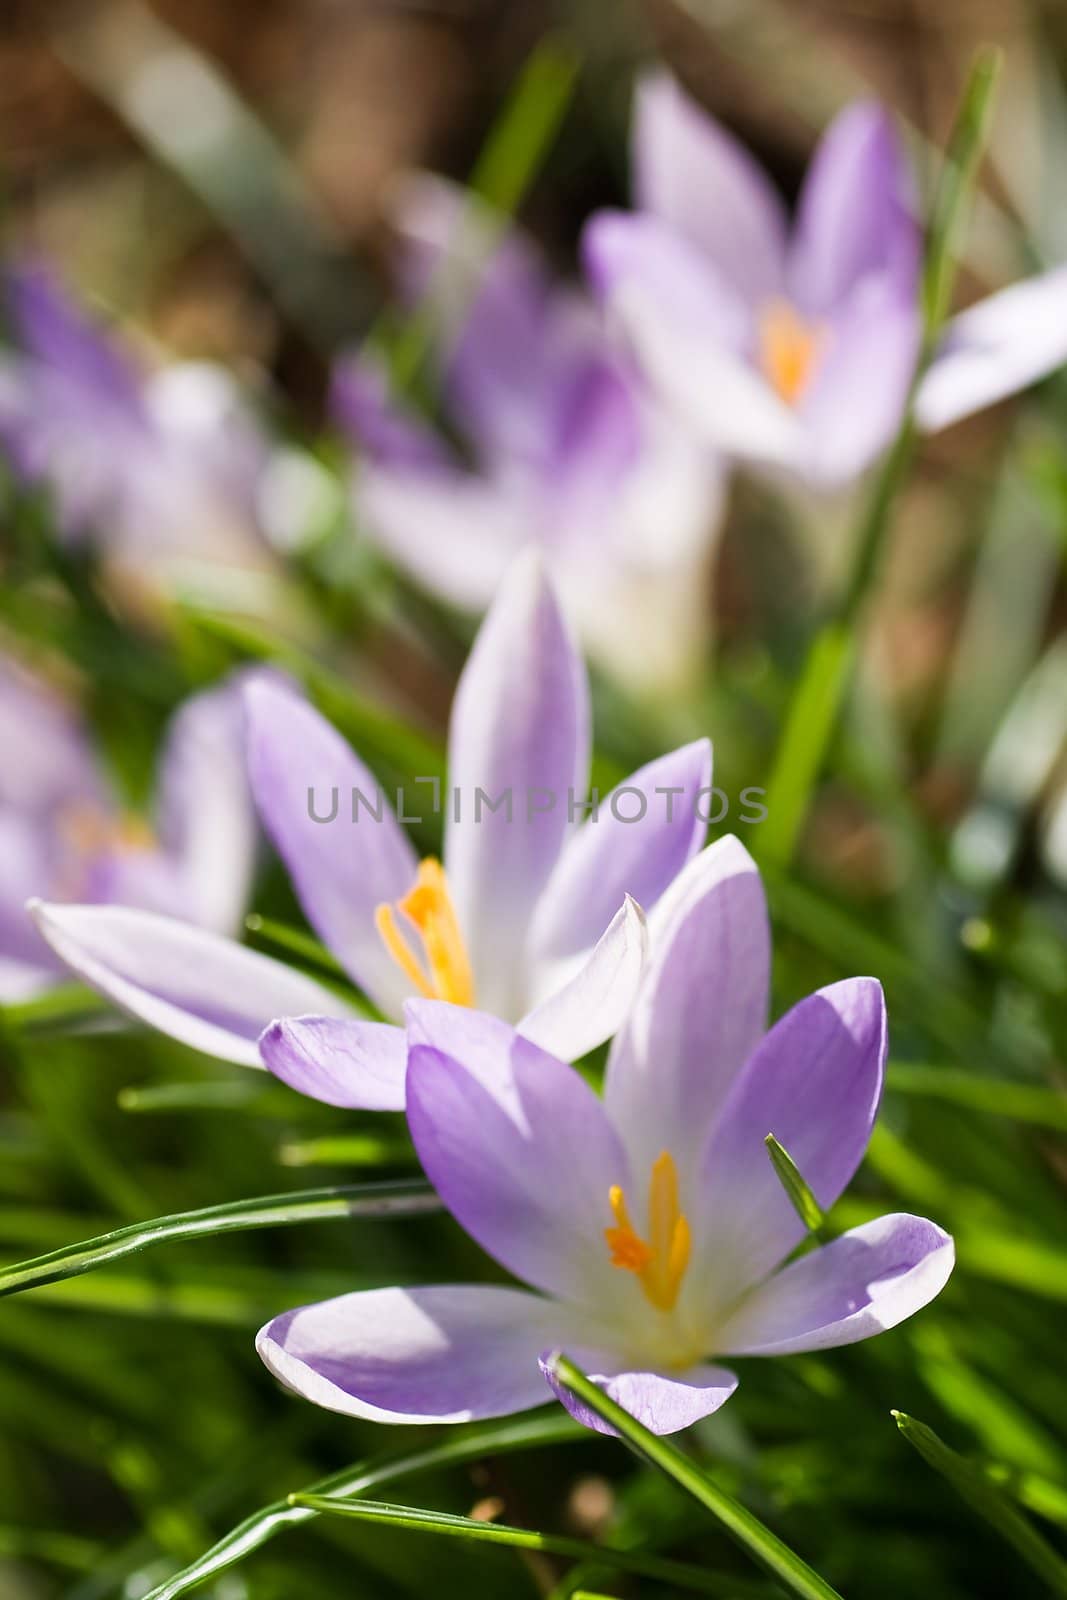 Group of purple and white crocus by Colette